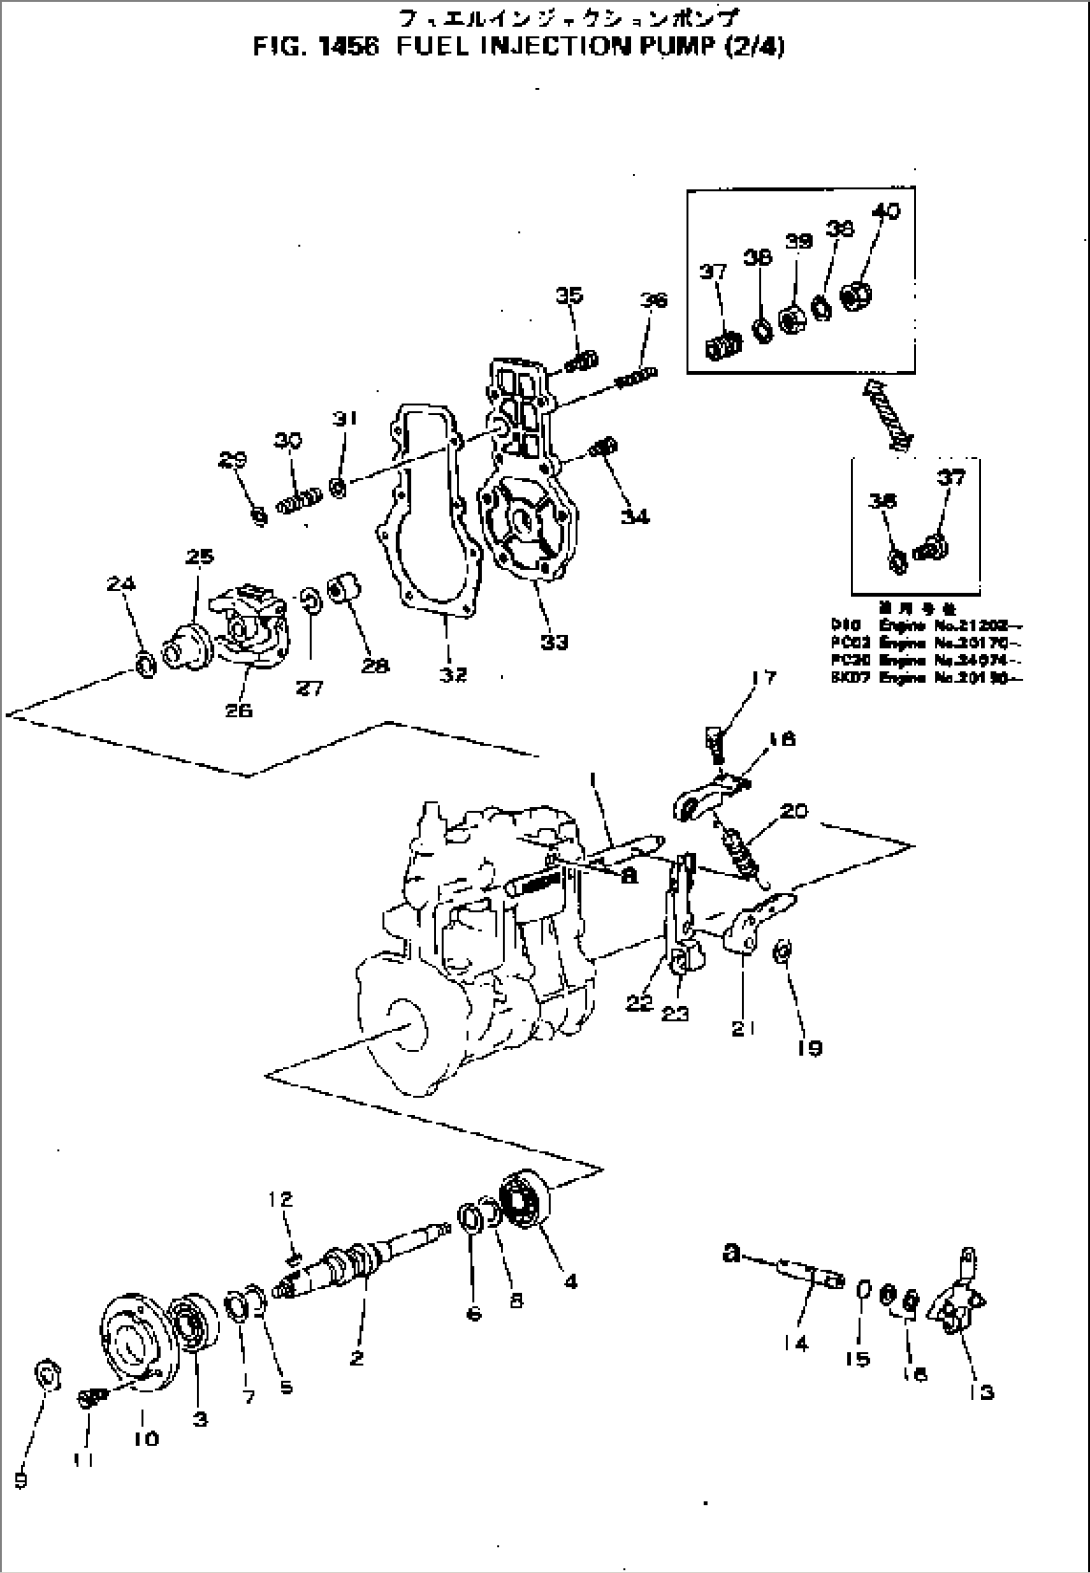 FUEL INJECTION PUMP (2/4)